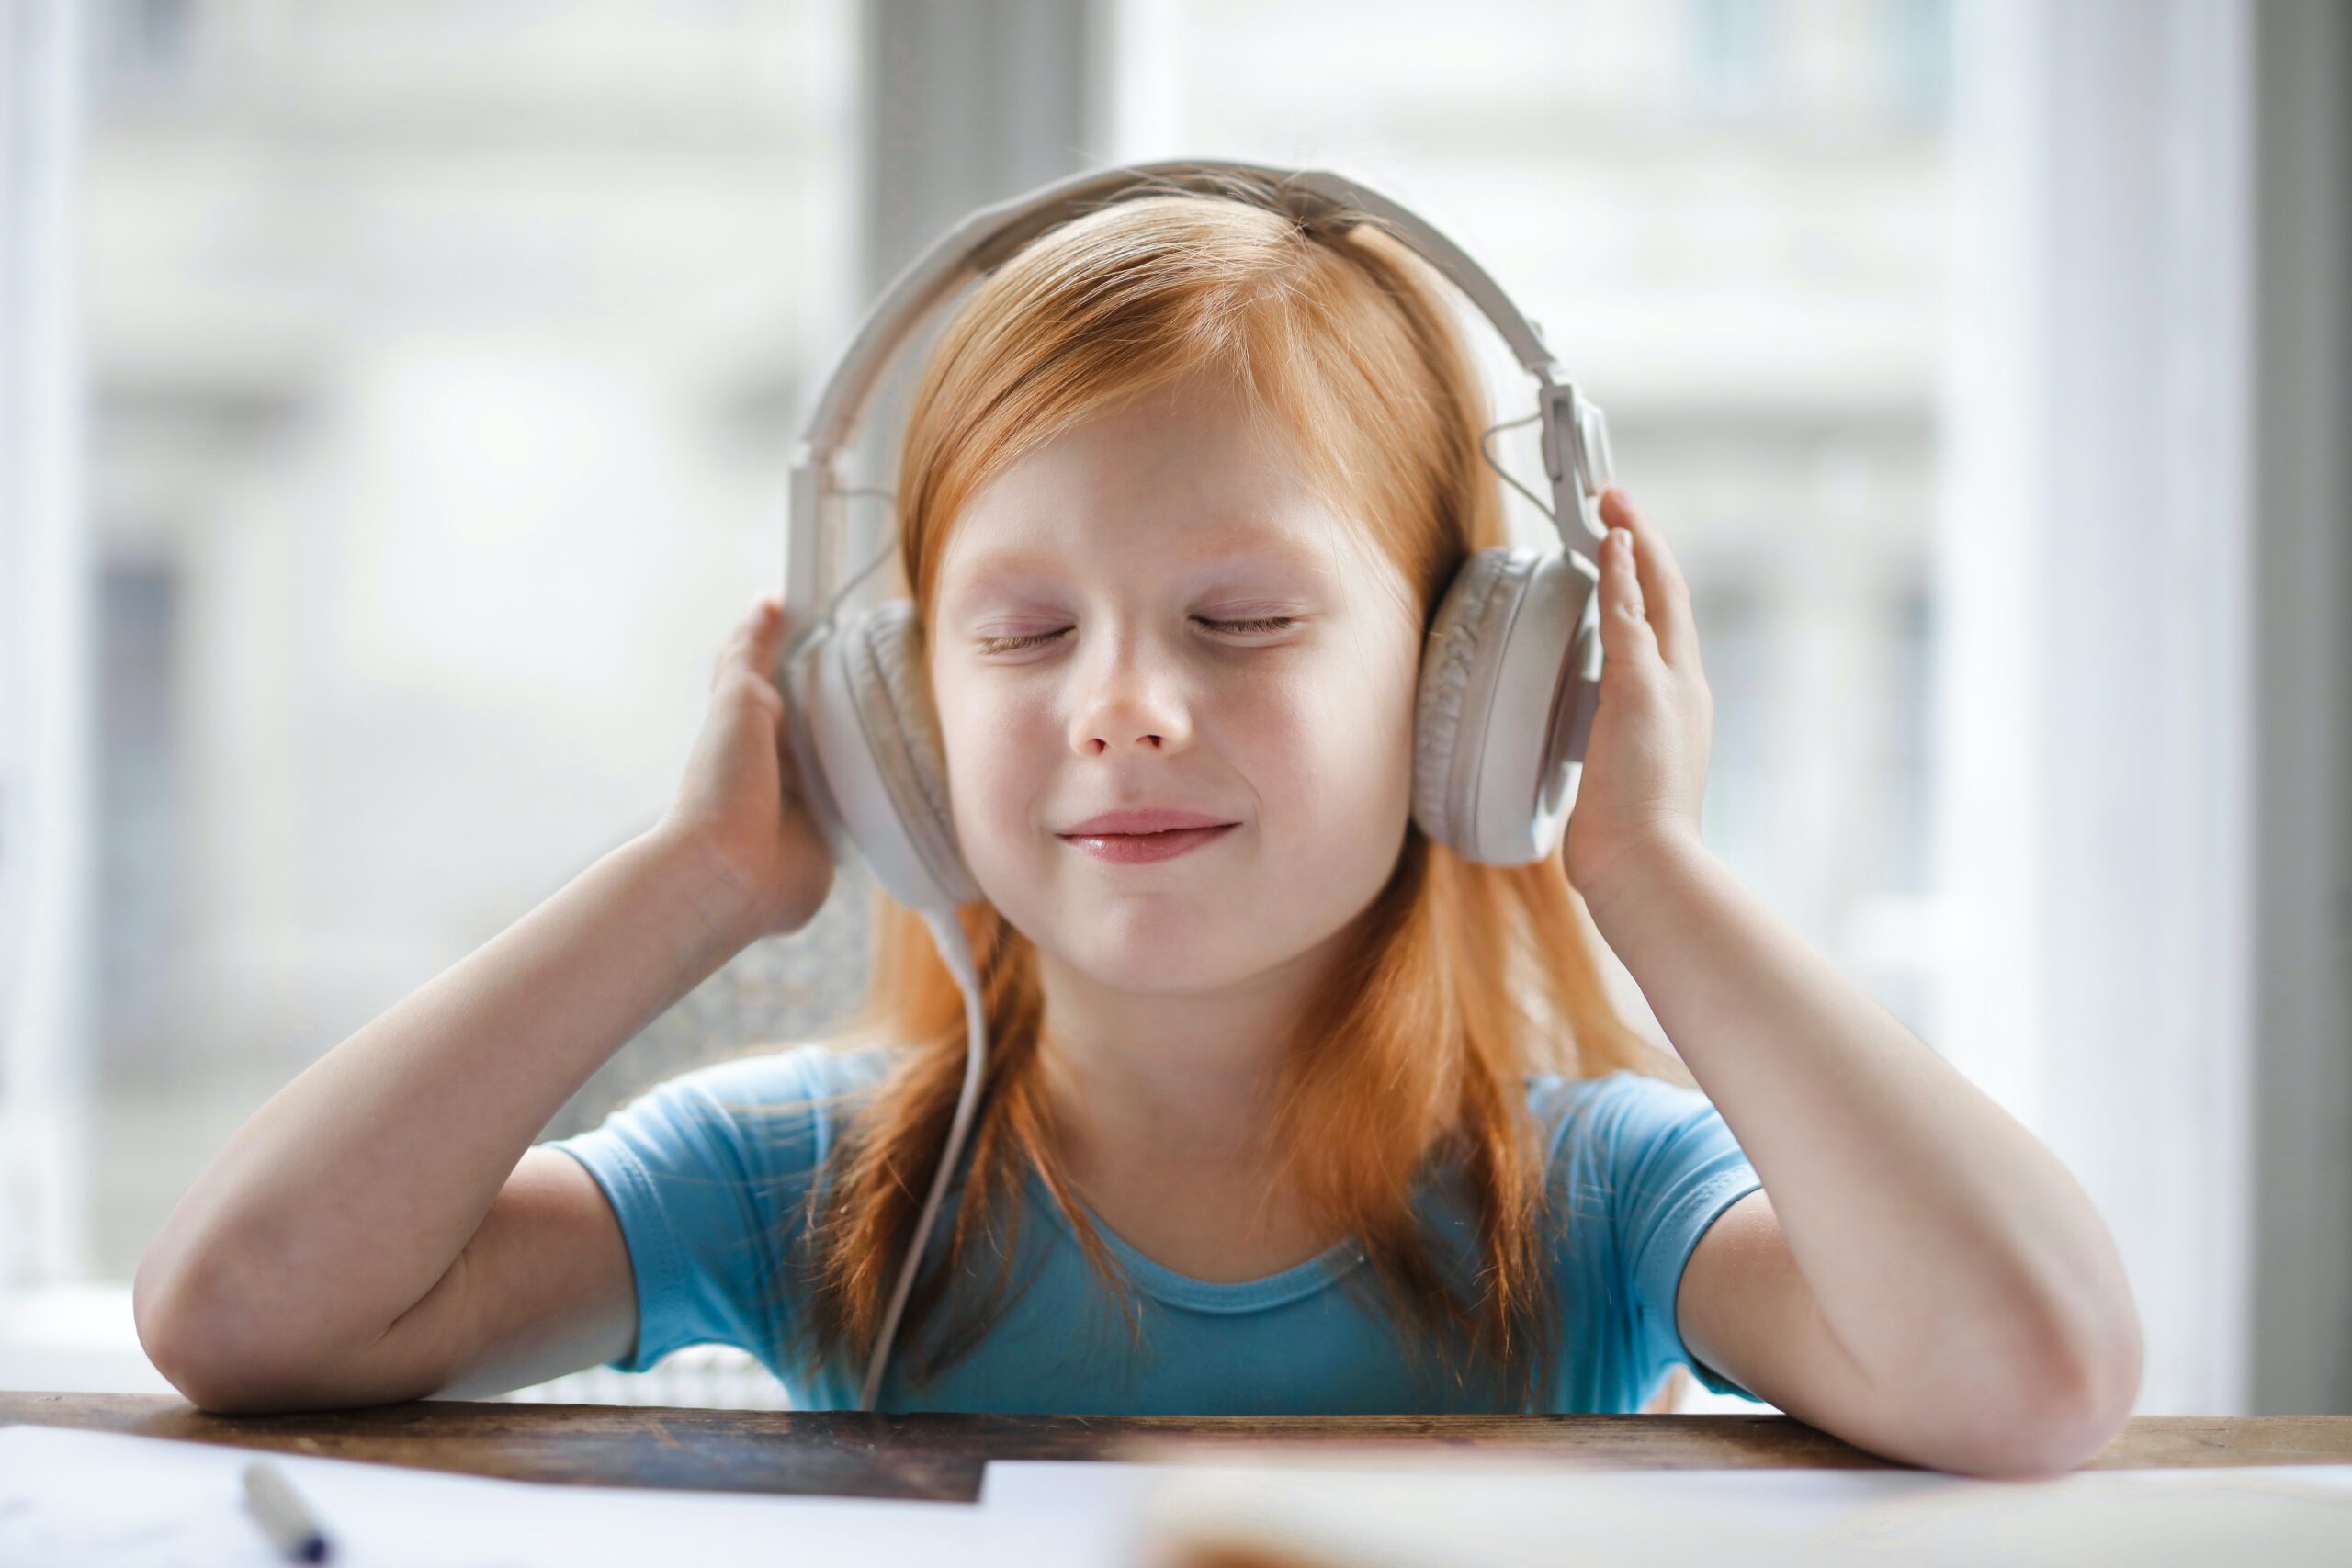 A young girl listens to music on her headphones.